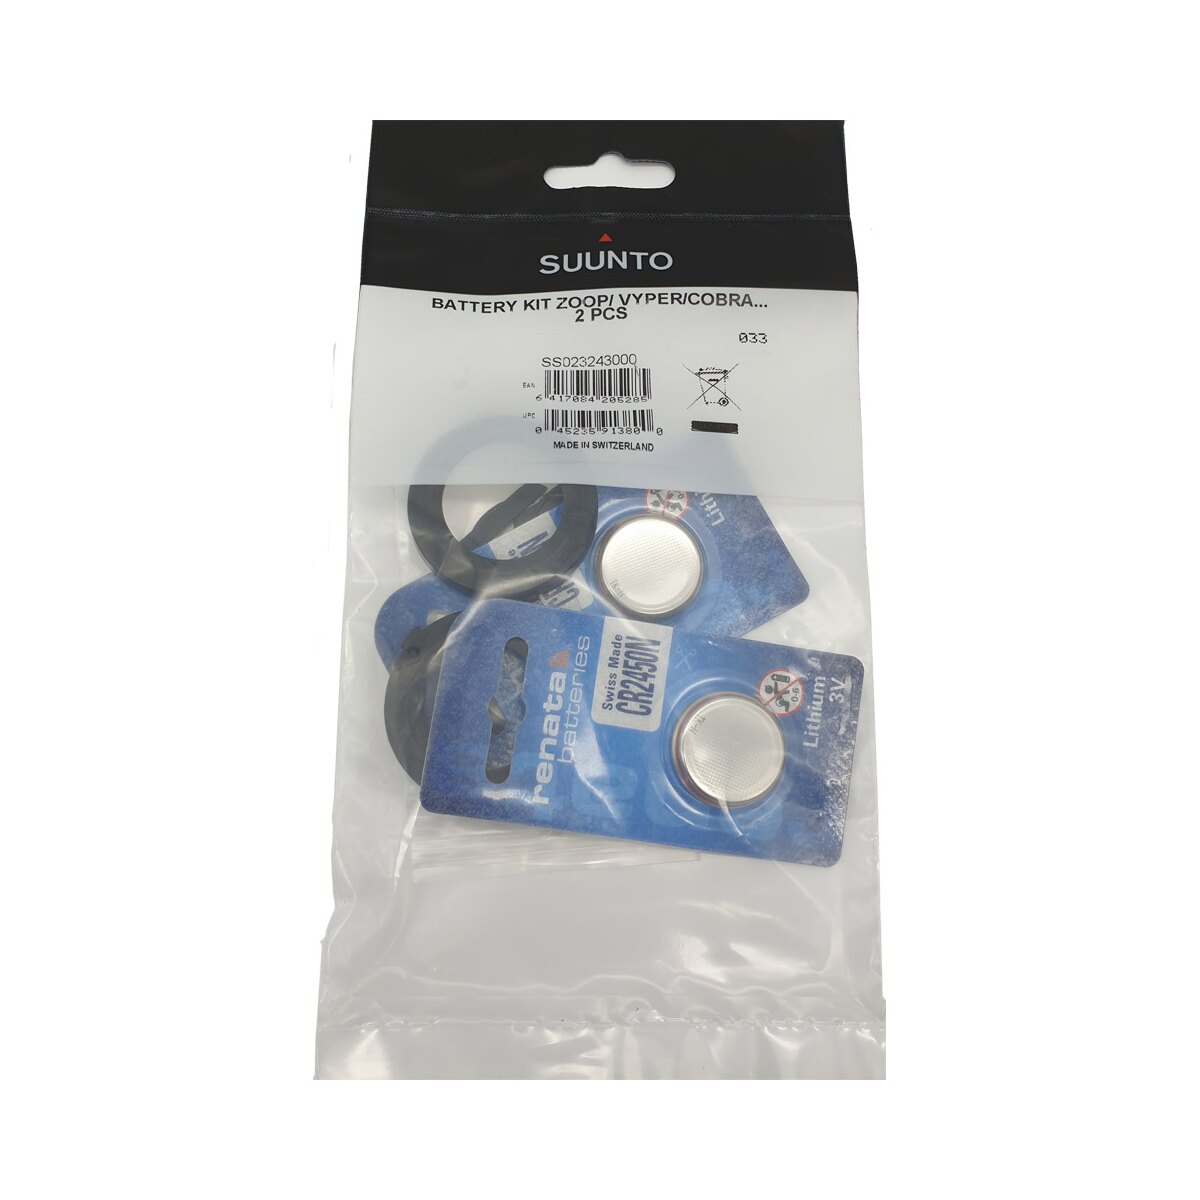 Battery Kit For Suunto HelO2 Vyper Air & Zoop NEW! 